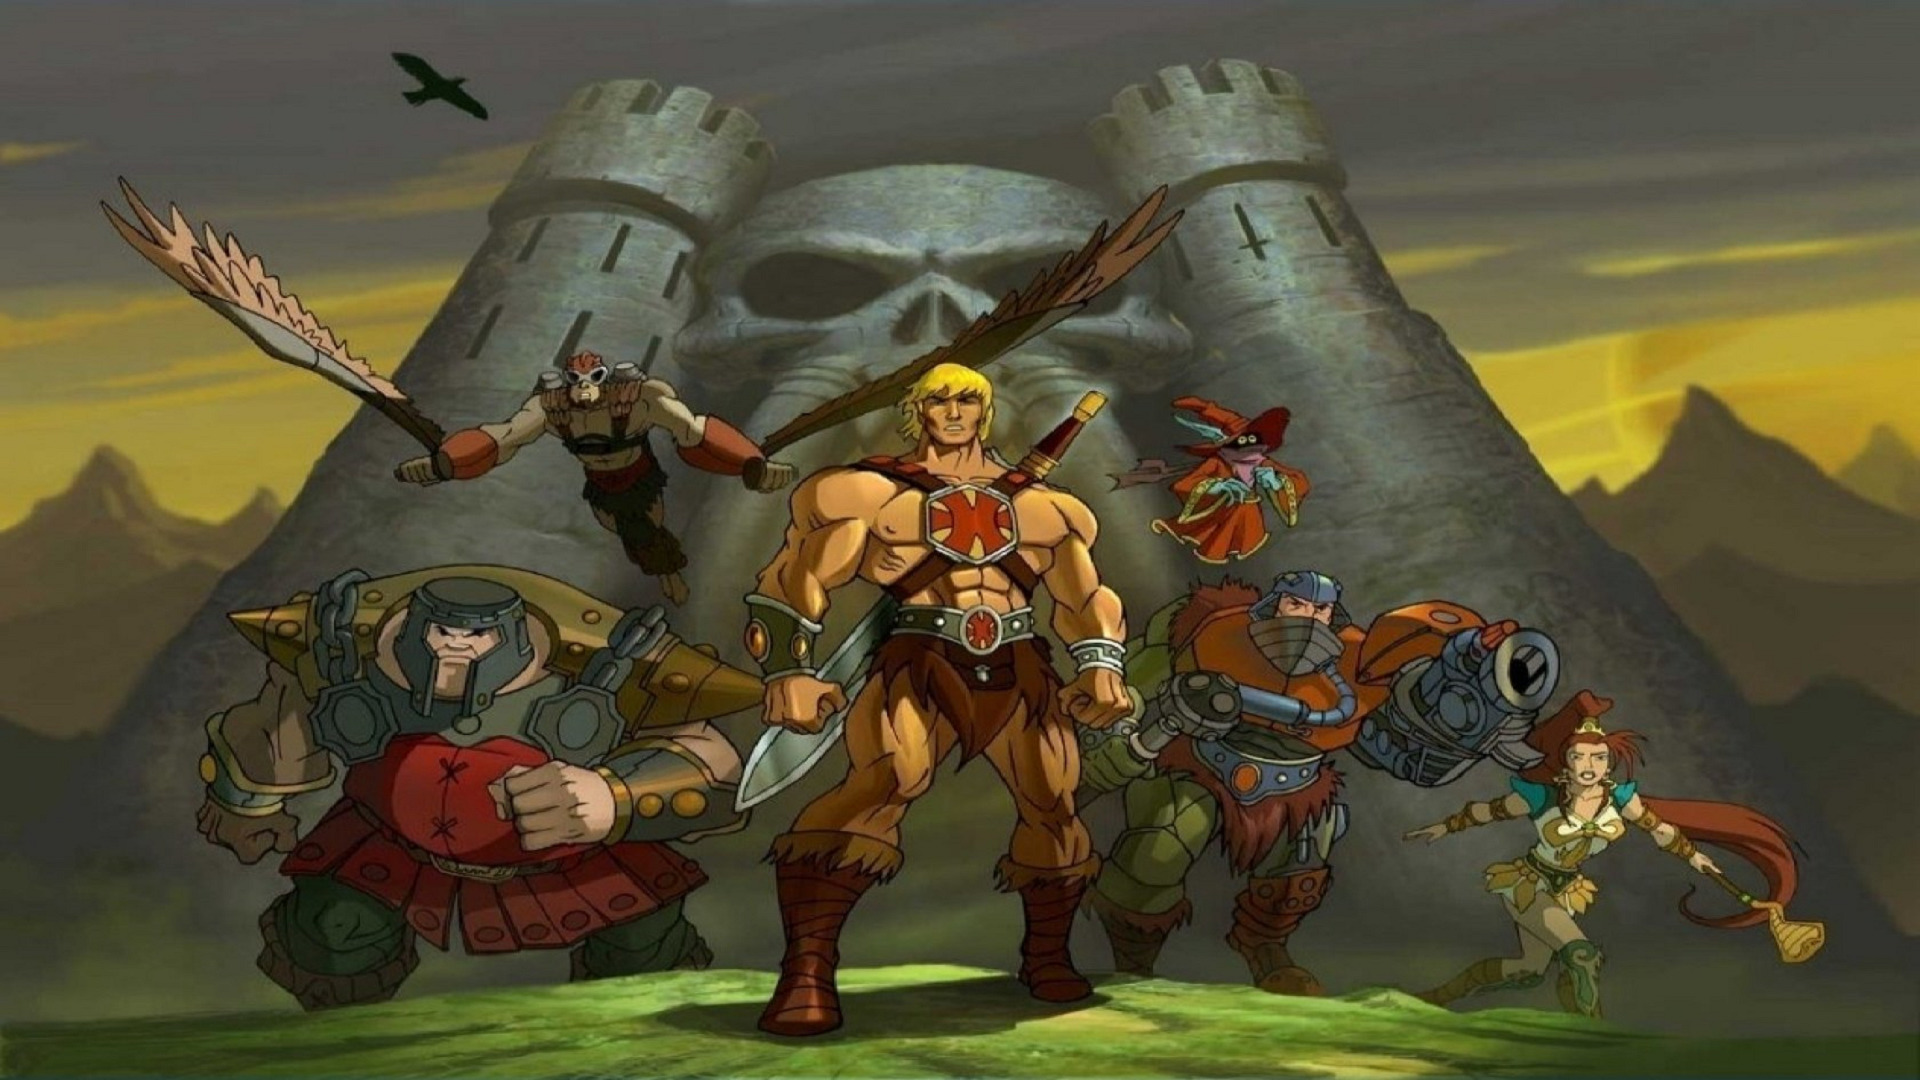 Masters of the Universe: He-Man: Power of Grayskull